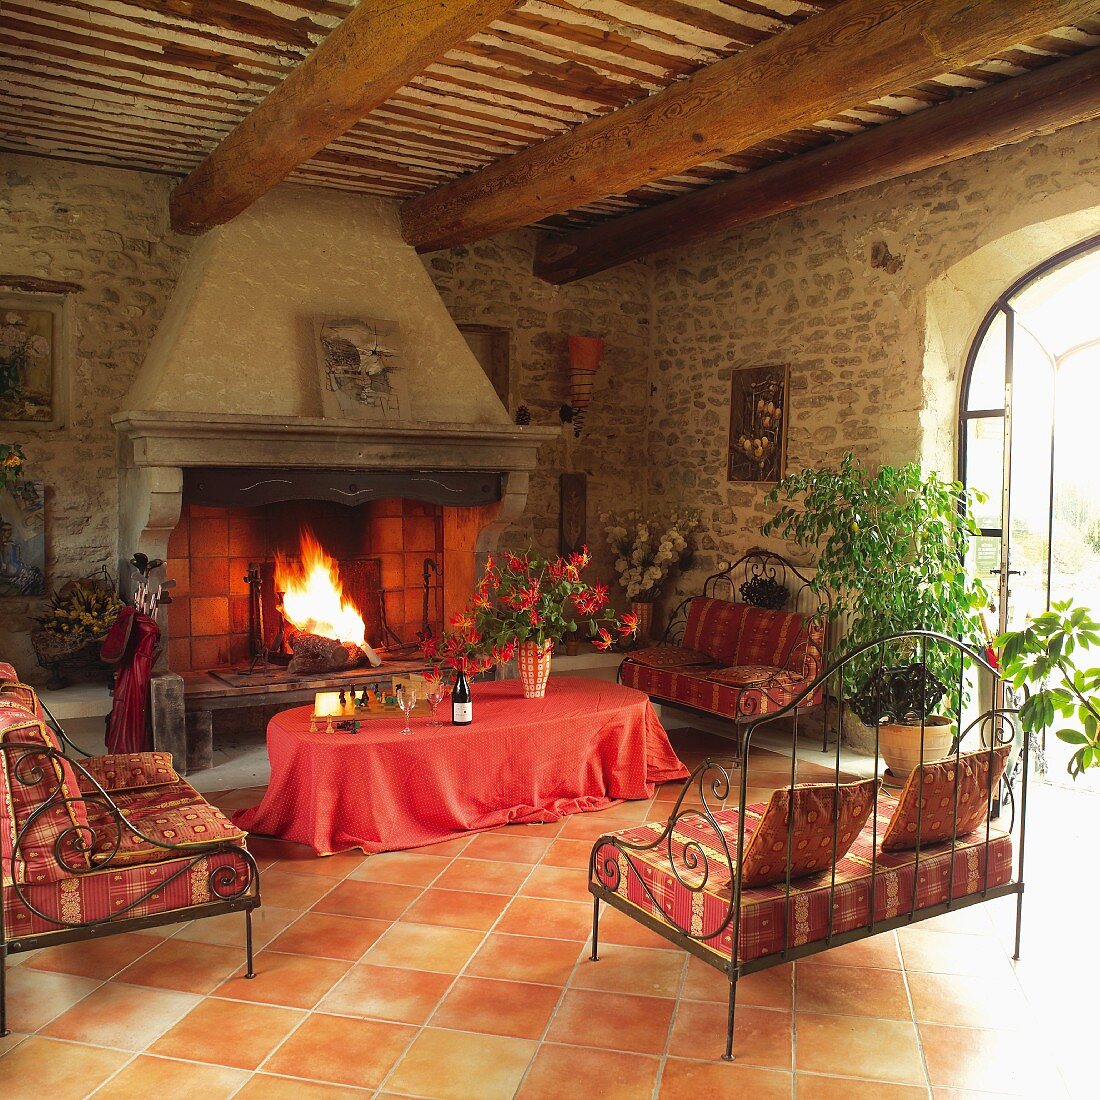 Inviting seating area with Provençal-patterned cushions on delicate metal sofas in front of imposing stone fireplace